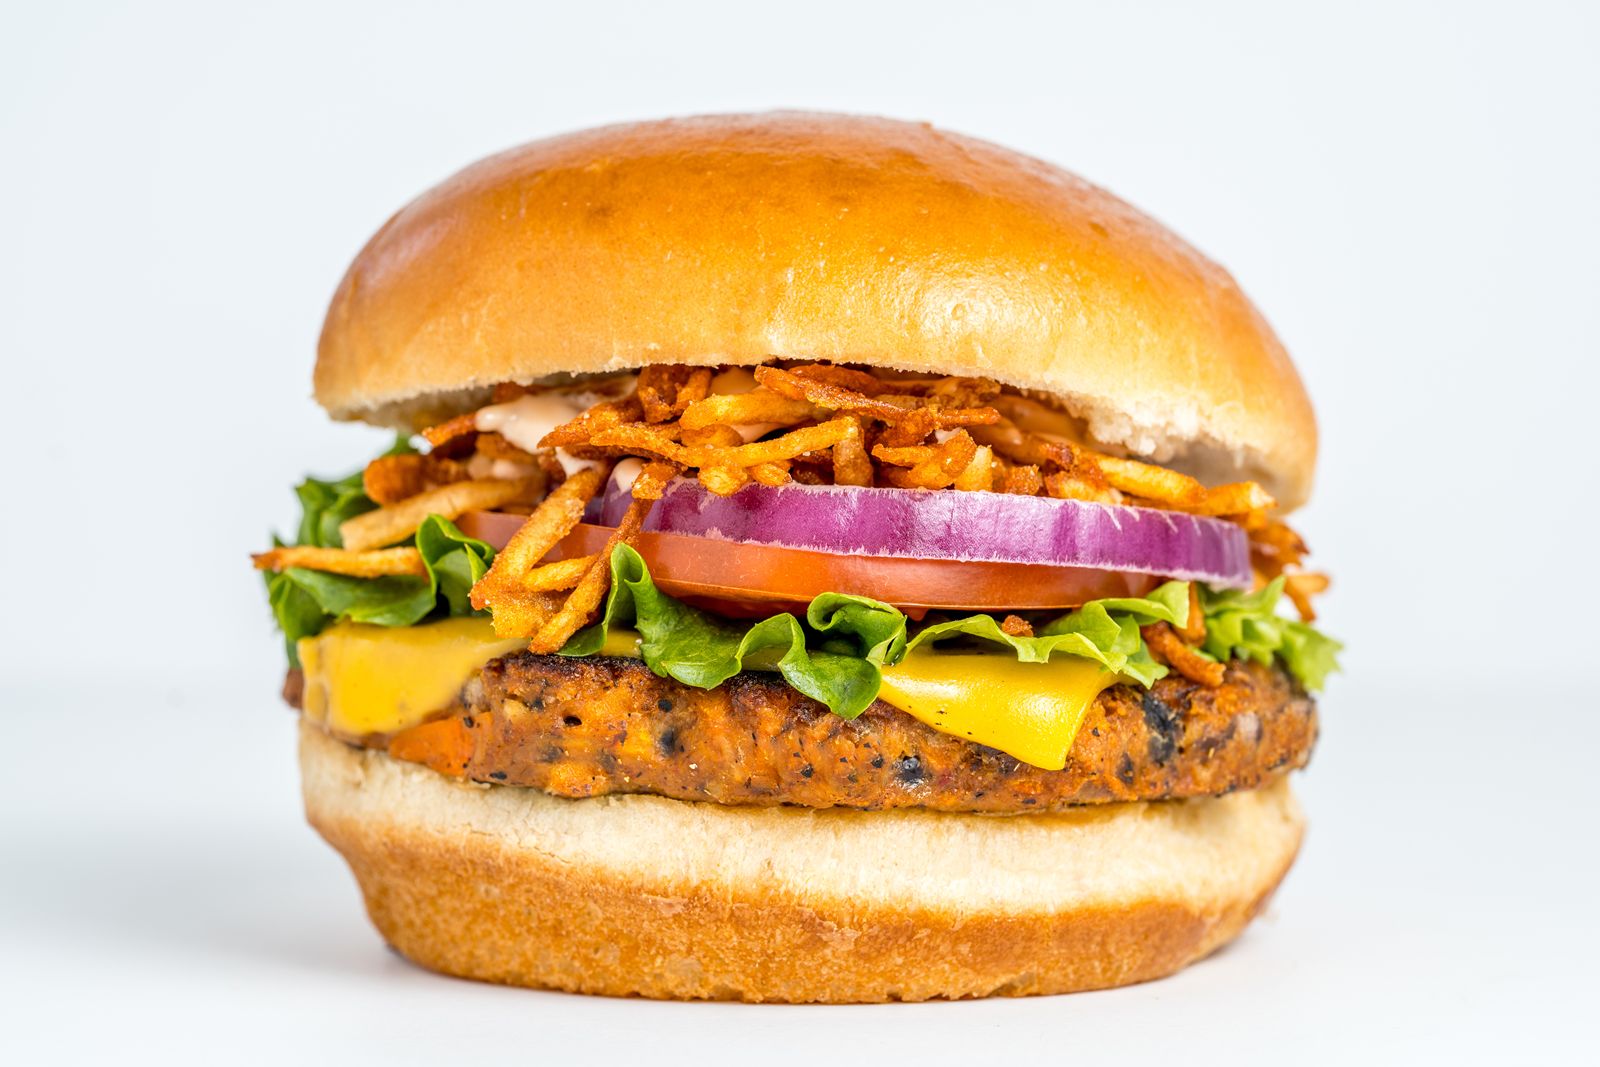 PINCHO Partners With Actual Veggies To Give Its Vegetarian Burger a Glow Up